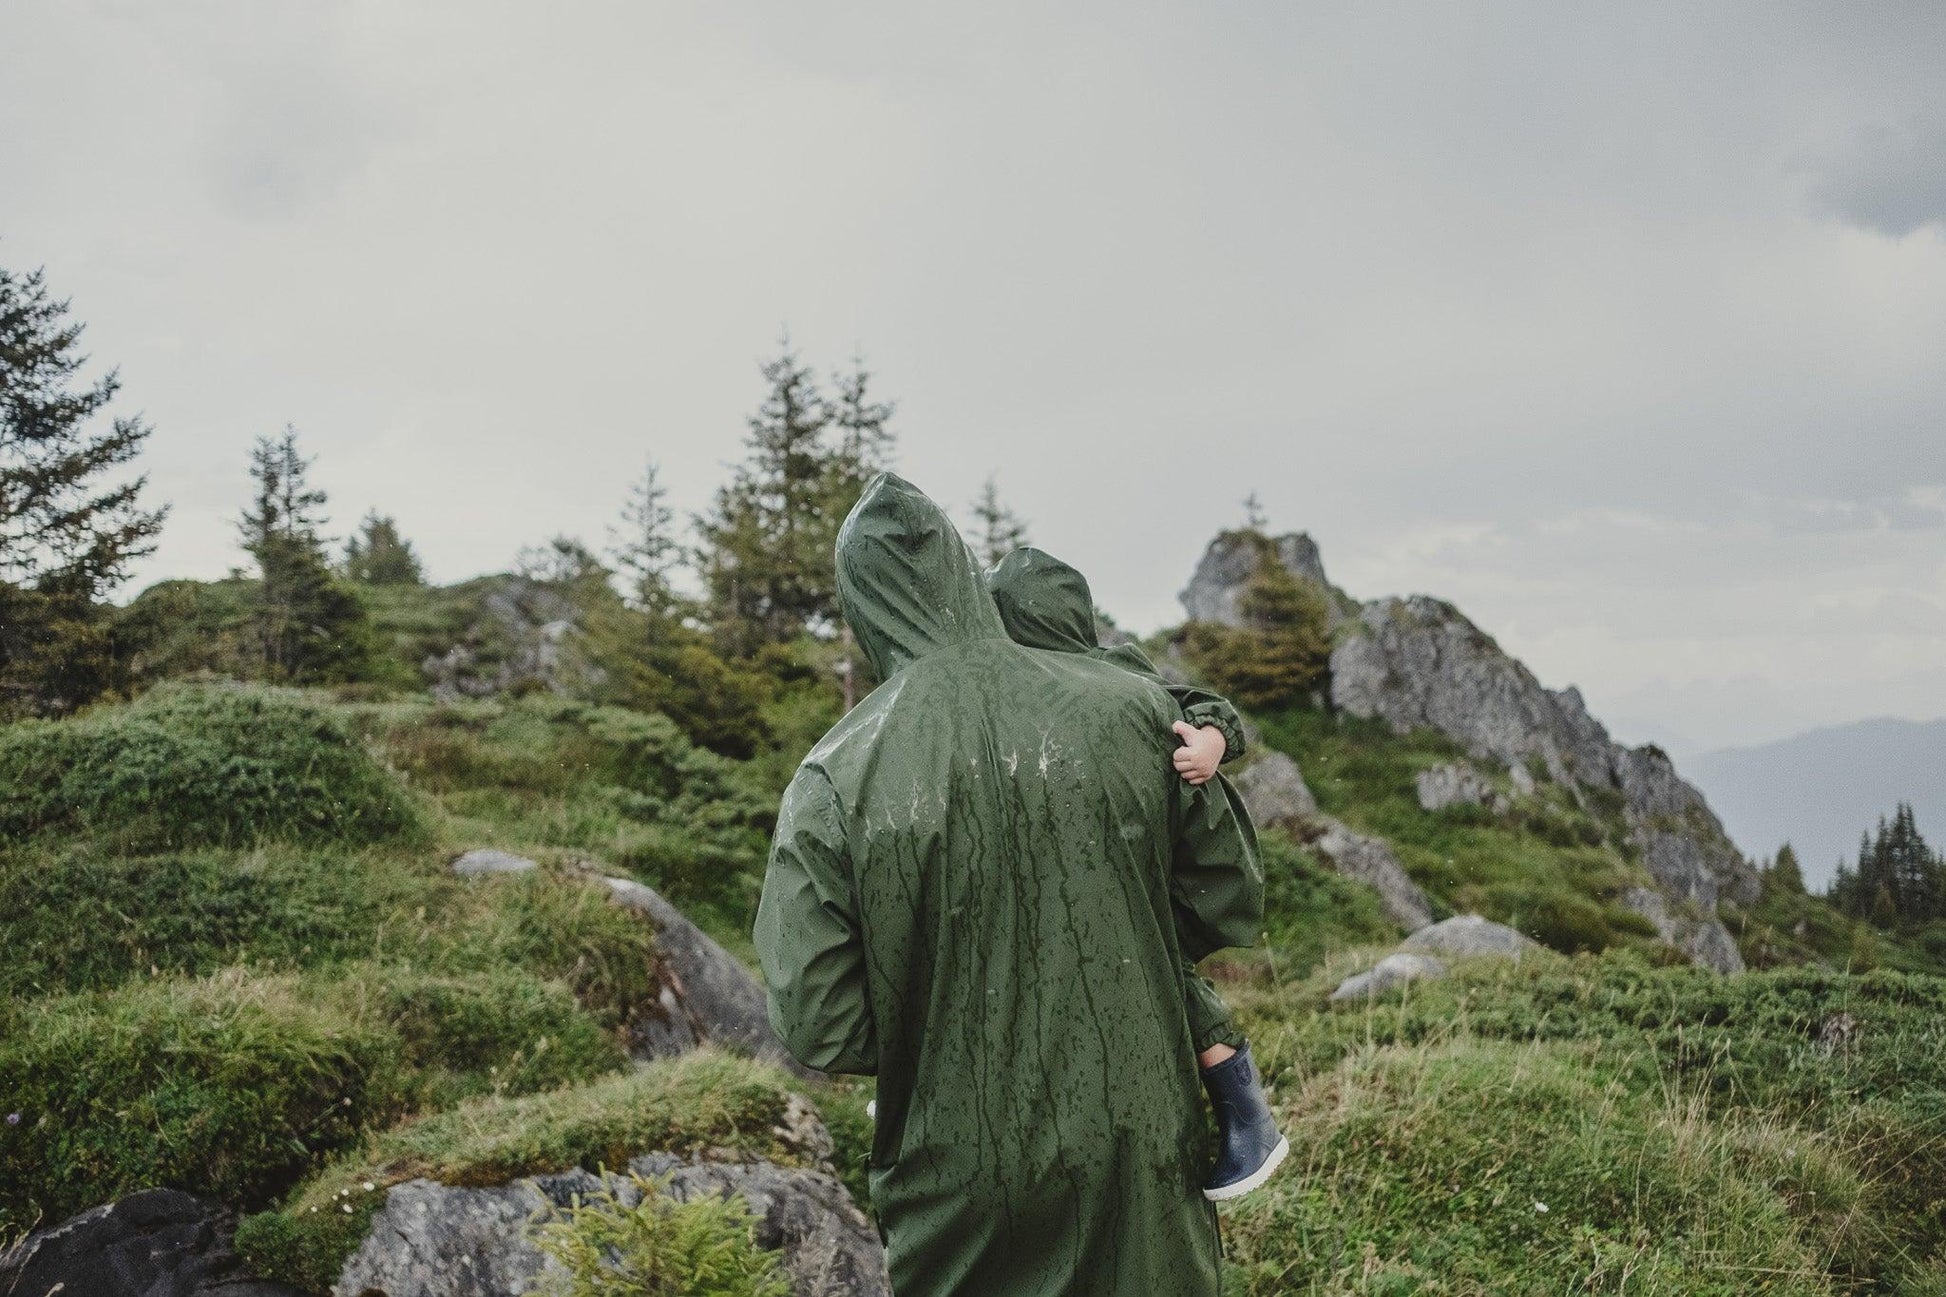 A person wearing a Khaki MellowConceptStore waterproof baby/kid clothing set with a hood stands in a mountainous landscape, facing towards the forest-covered slopes under a cloudy sky.